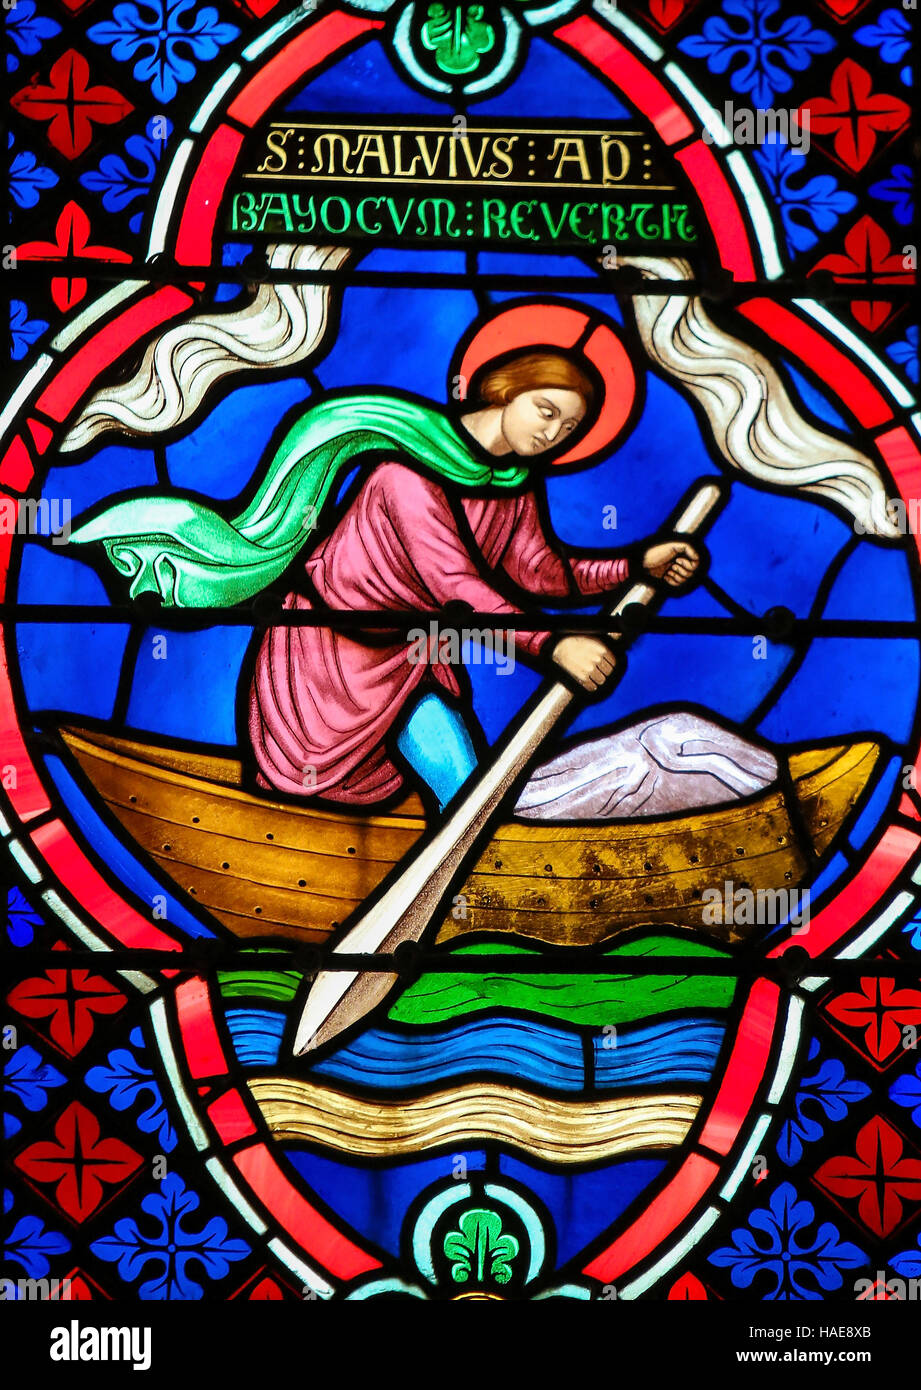 Stained Glass window in the Cathedral of Bayeux, France, depicting Saint Manveus or Manvieu, 5th century bishop of Bayeux, in a rowing boat returning Stock Photo